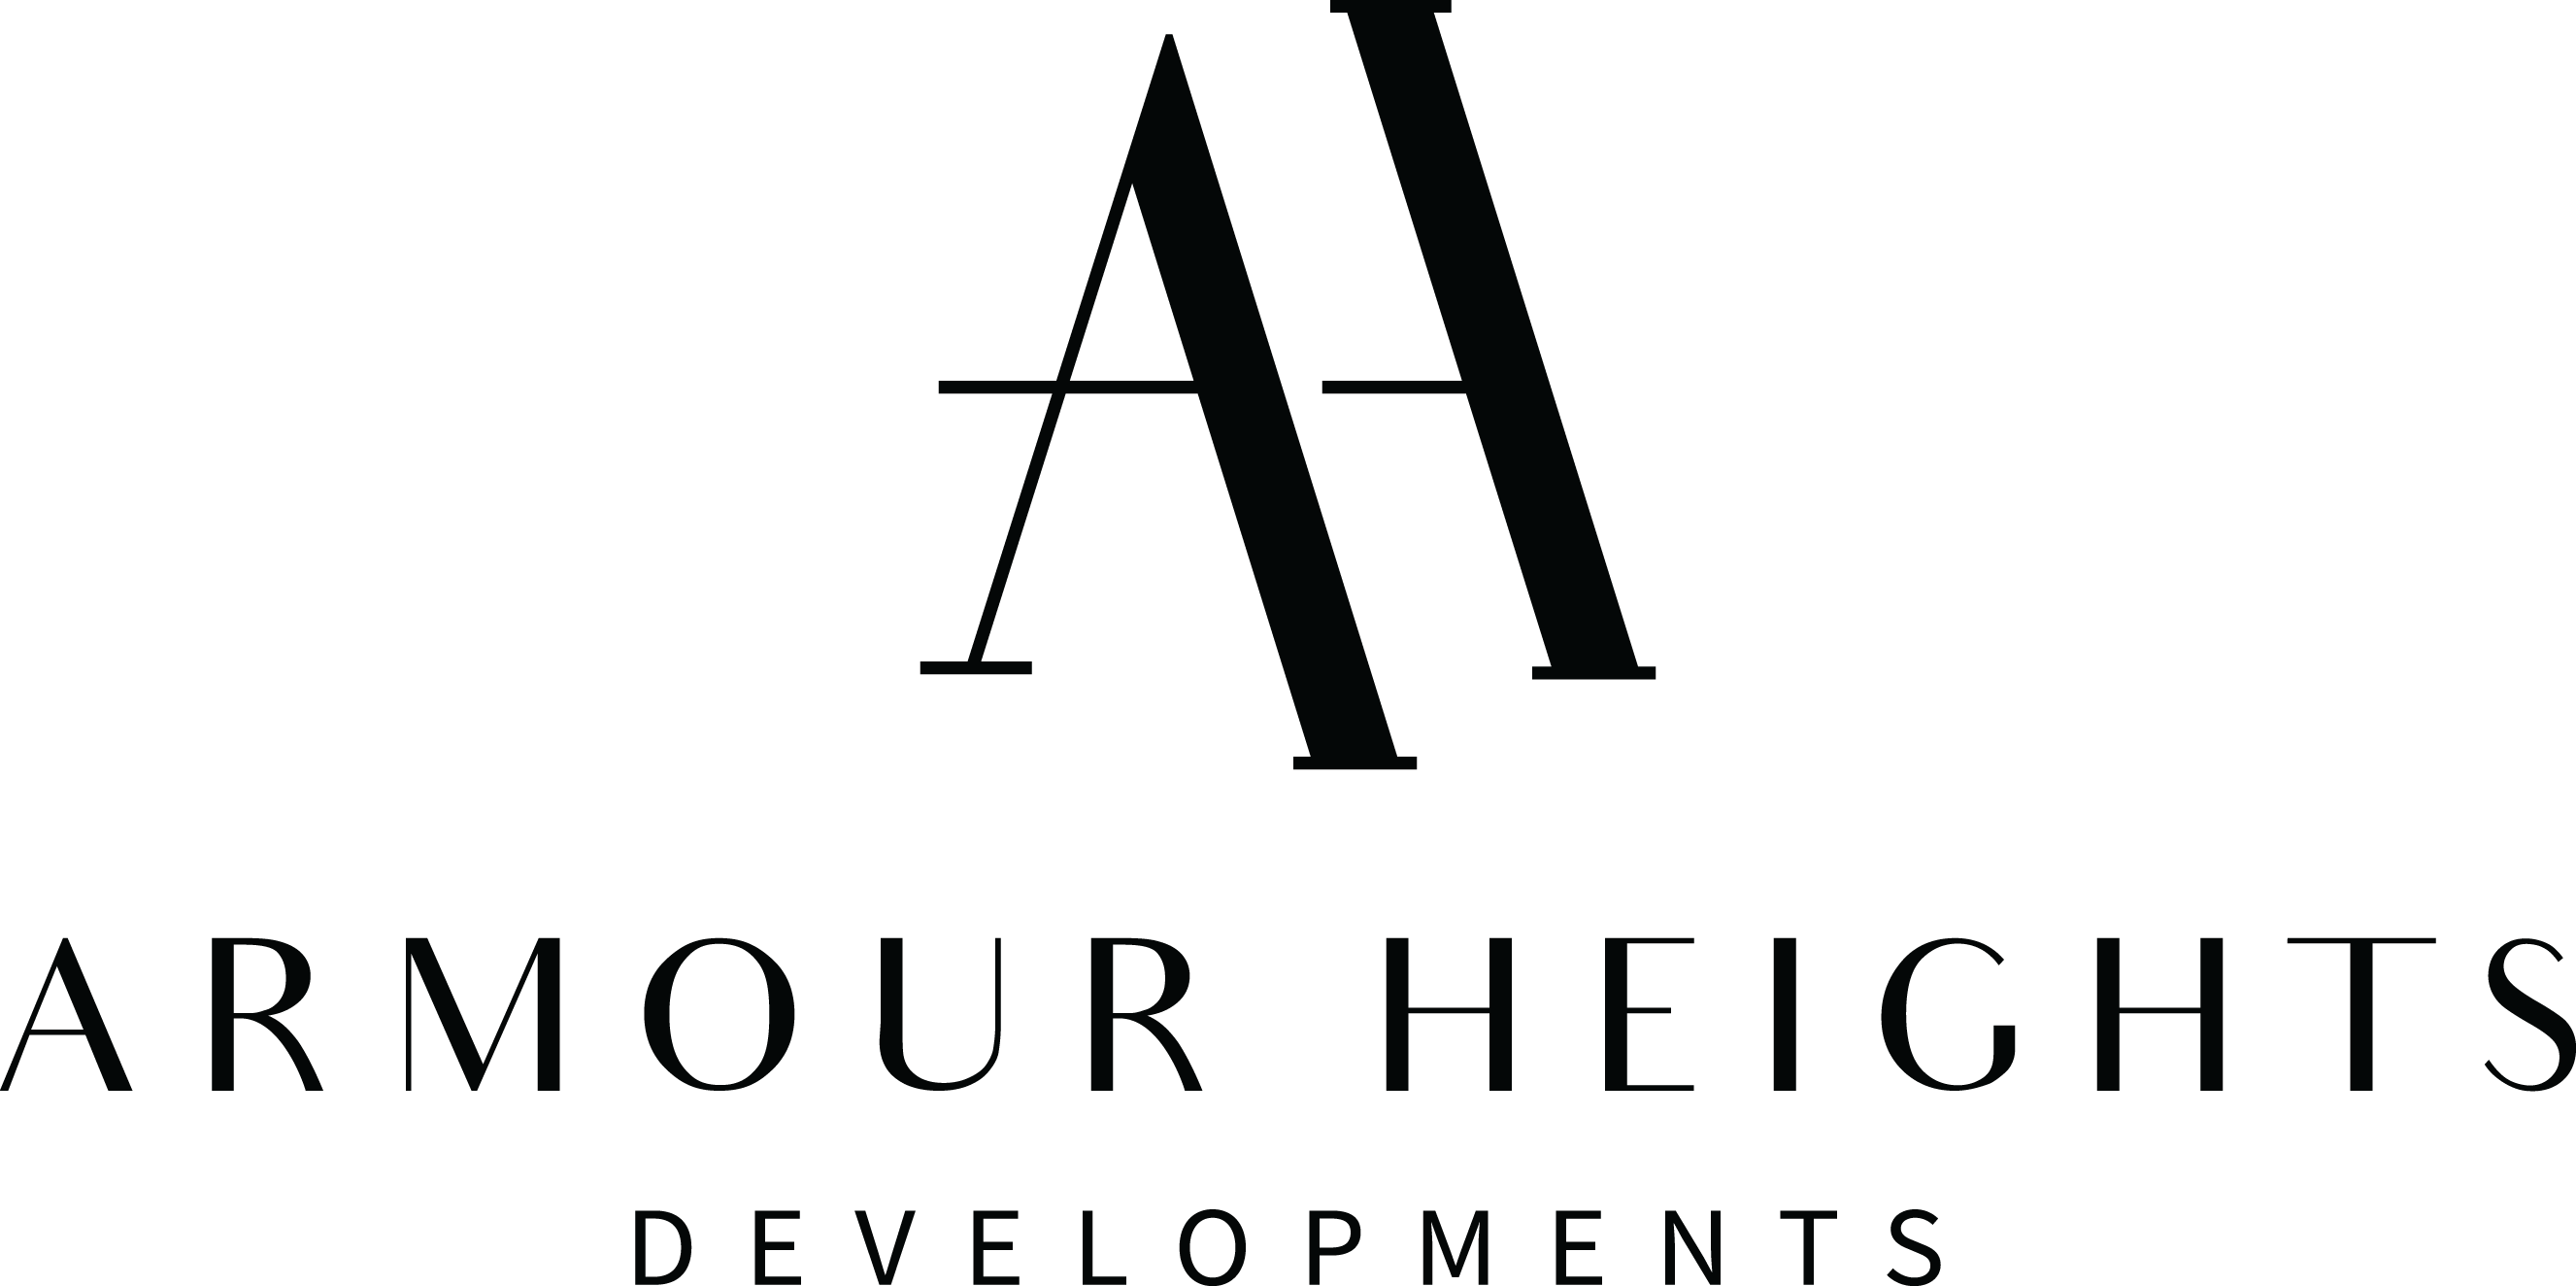 Armour Heights Developments			